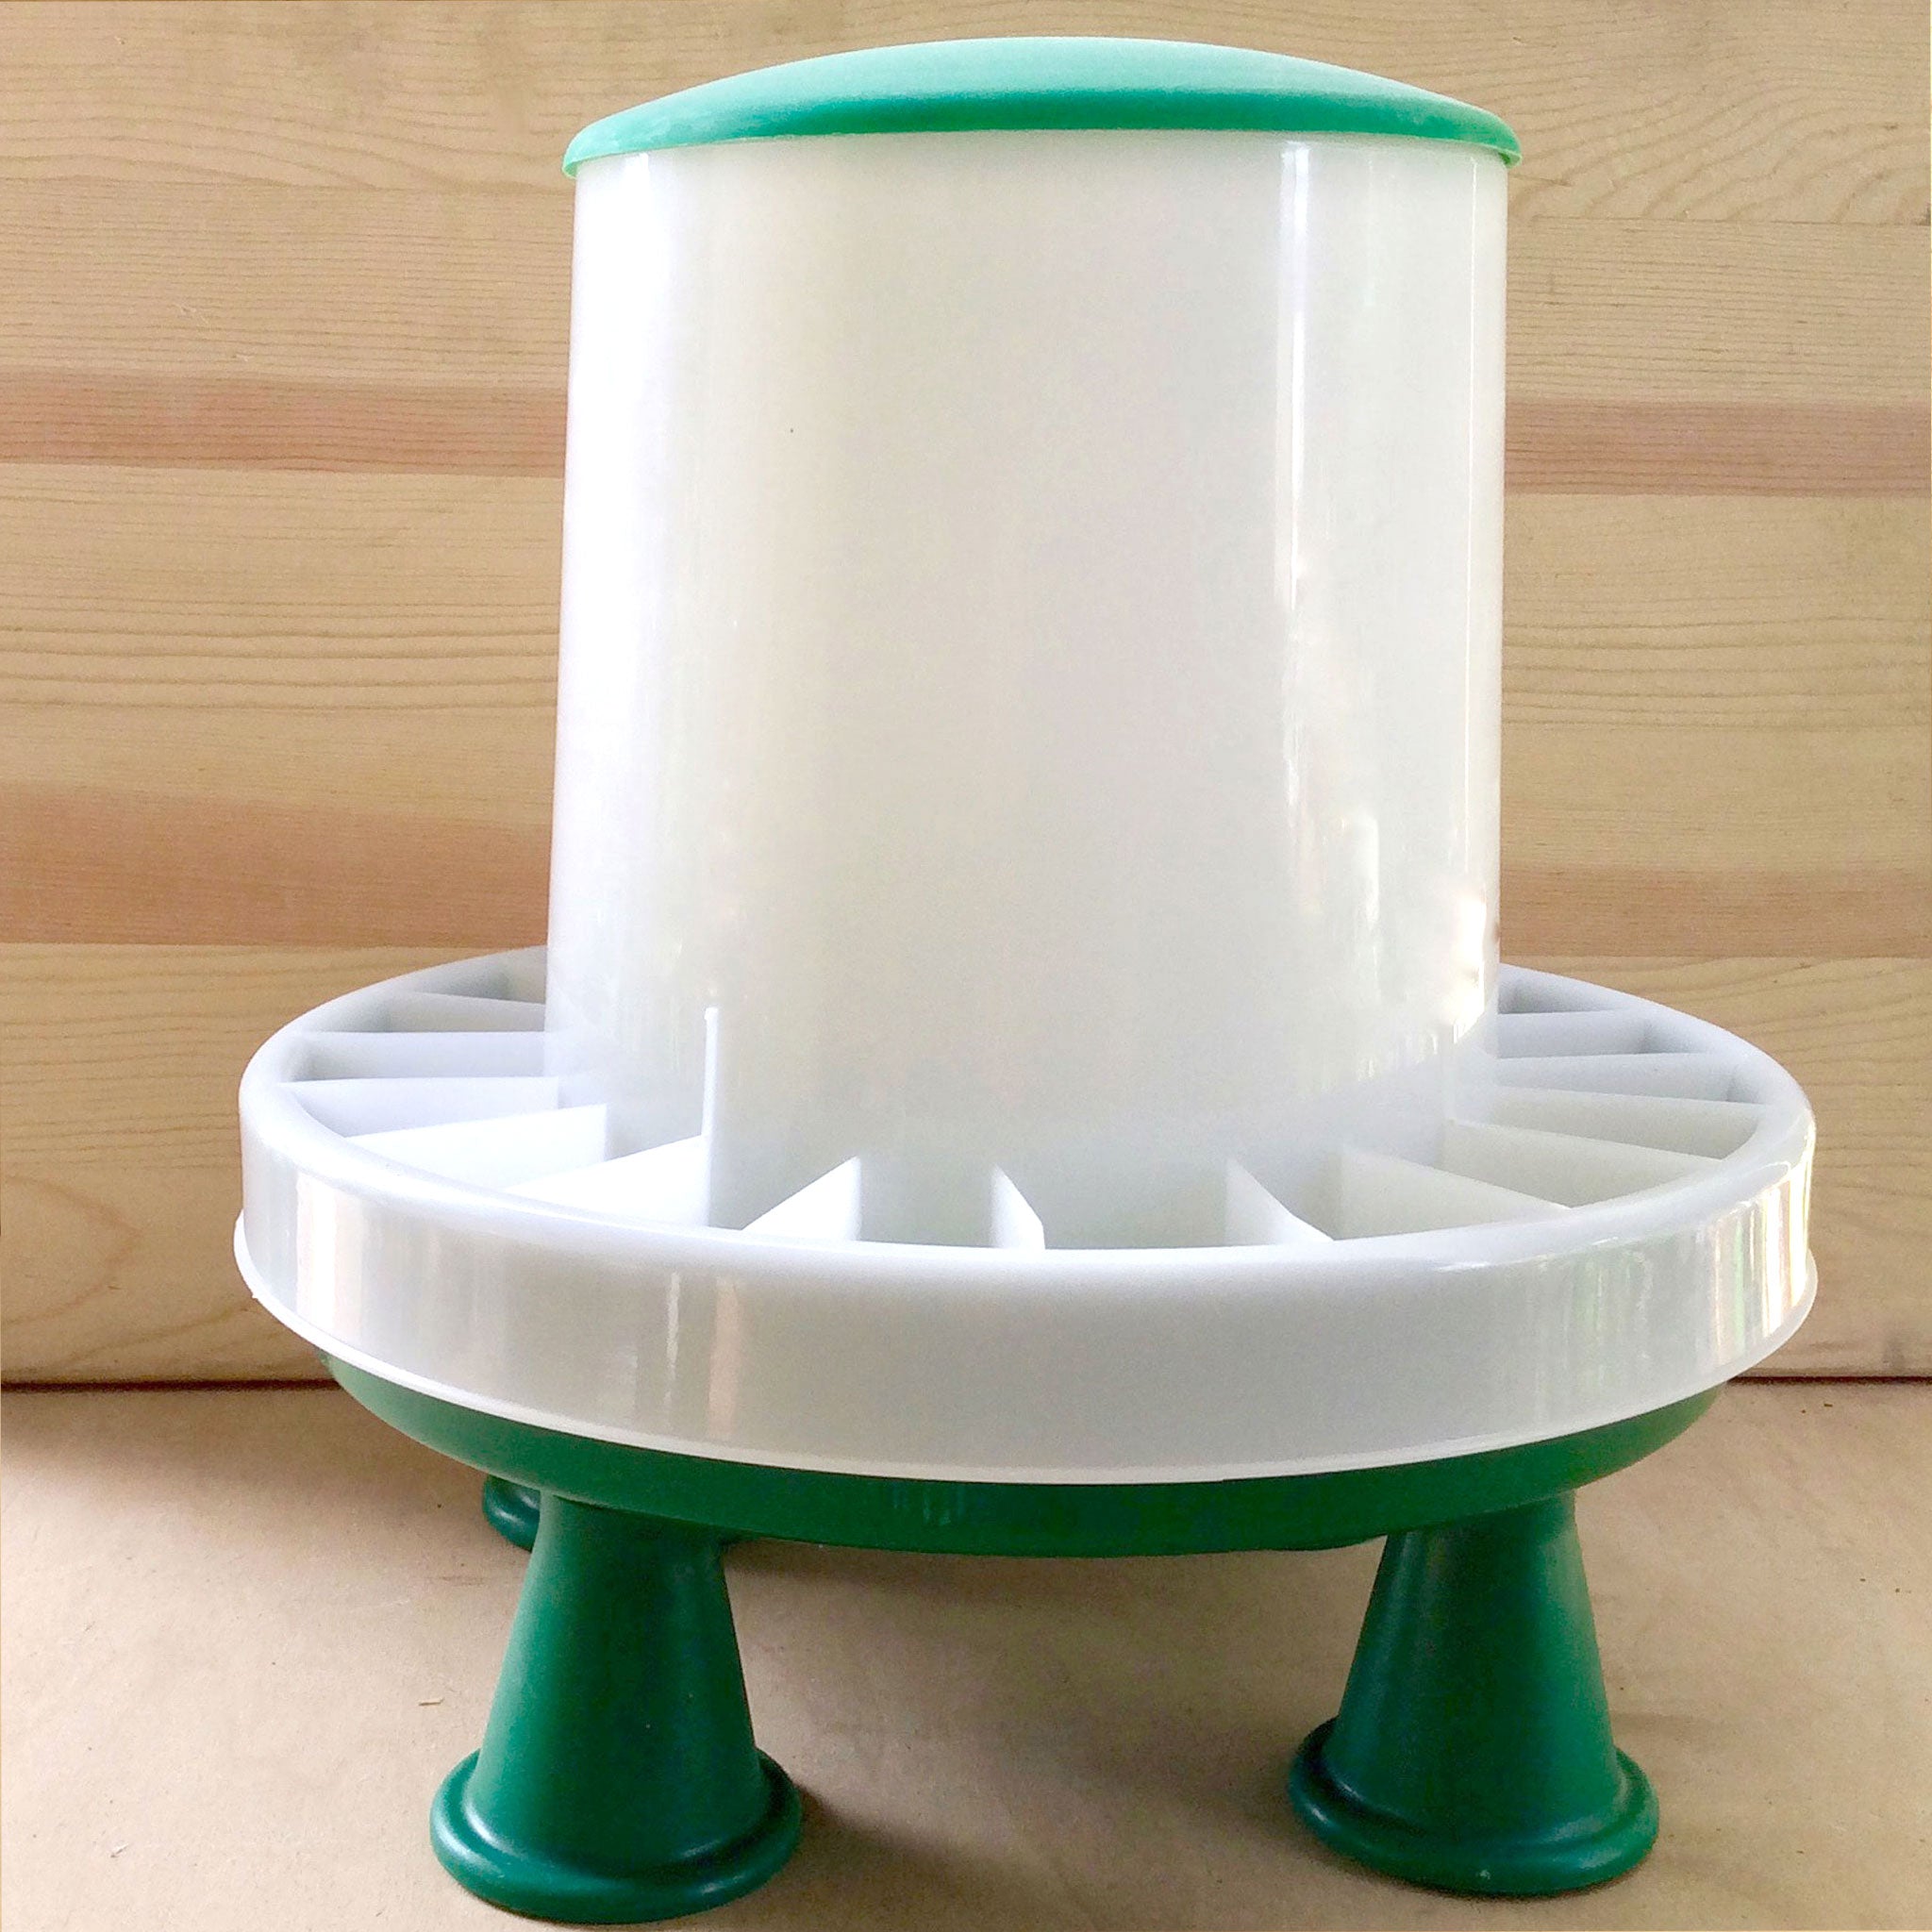 Green Feeder with detachable legs - 2 sizes - holds 6lbs and 13lbs